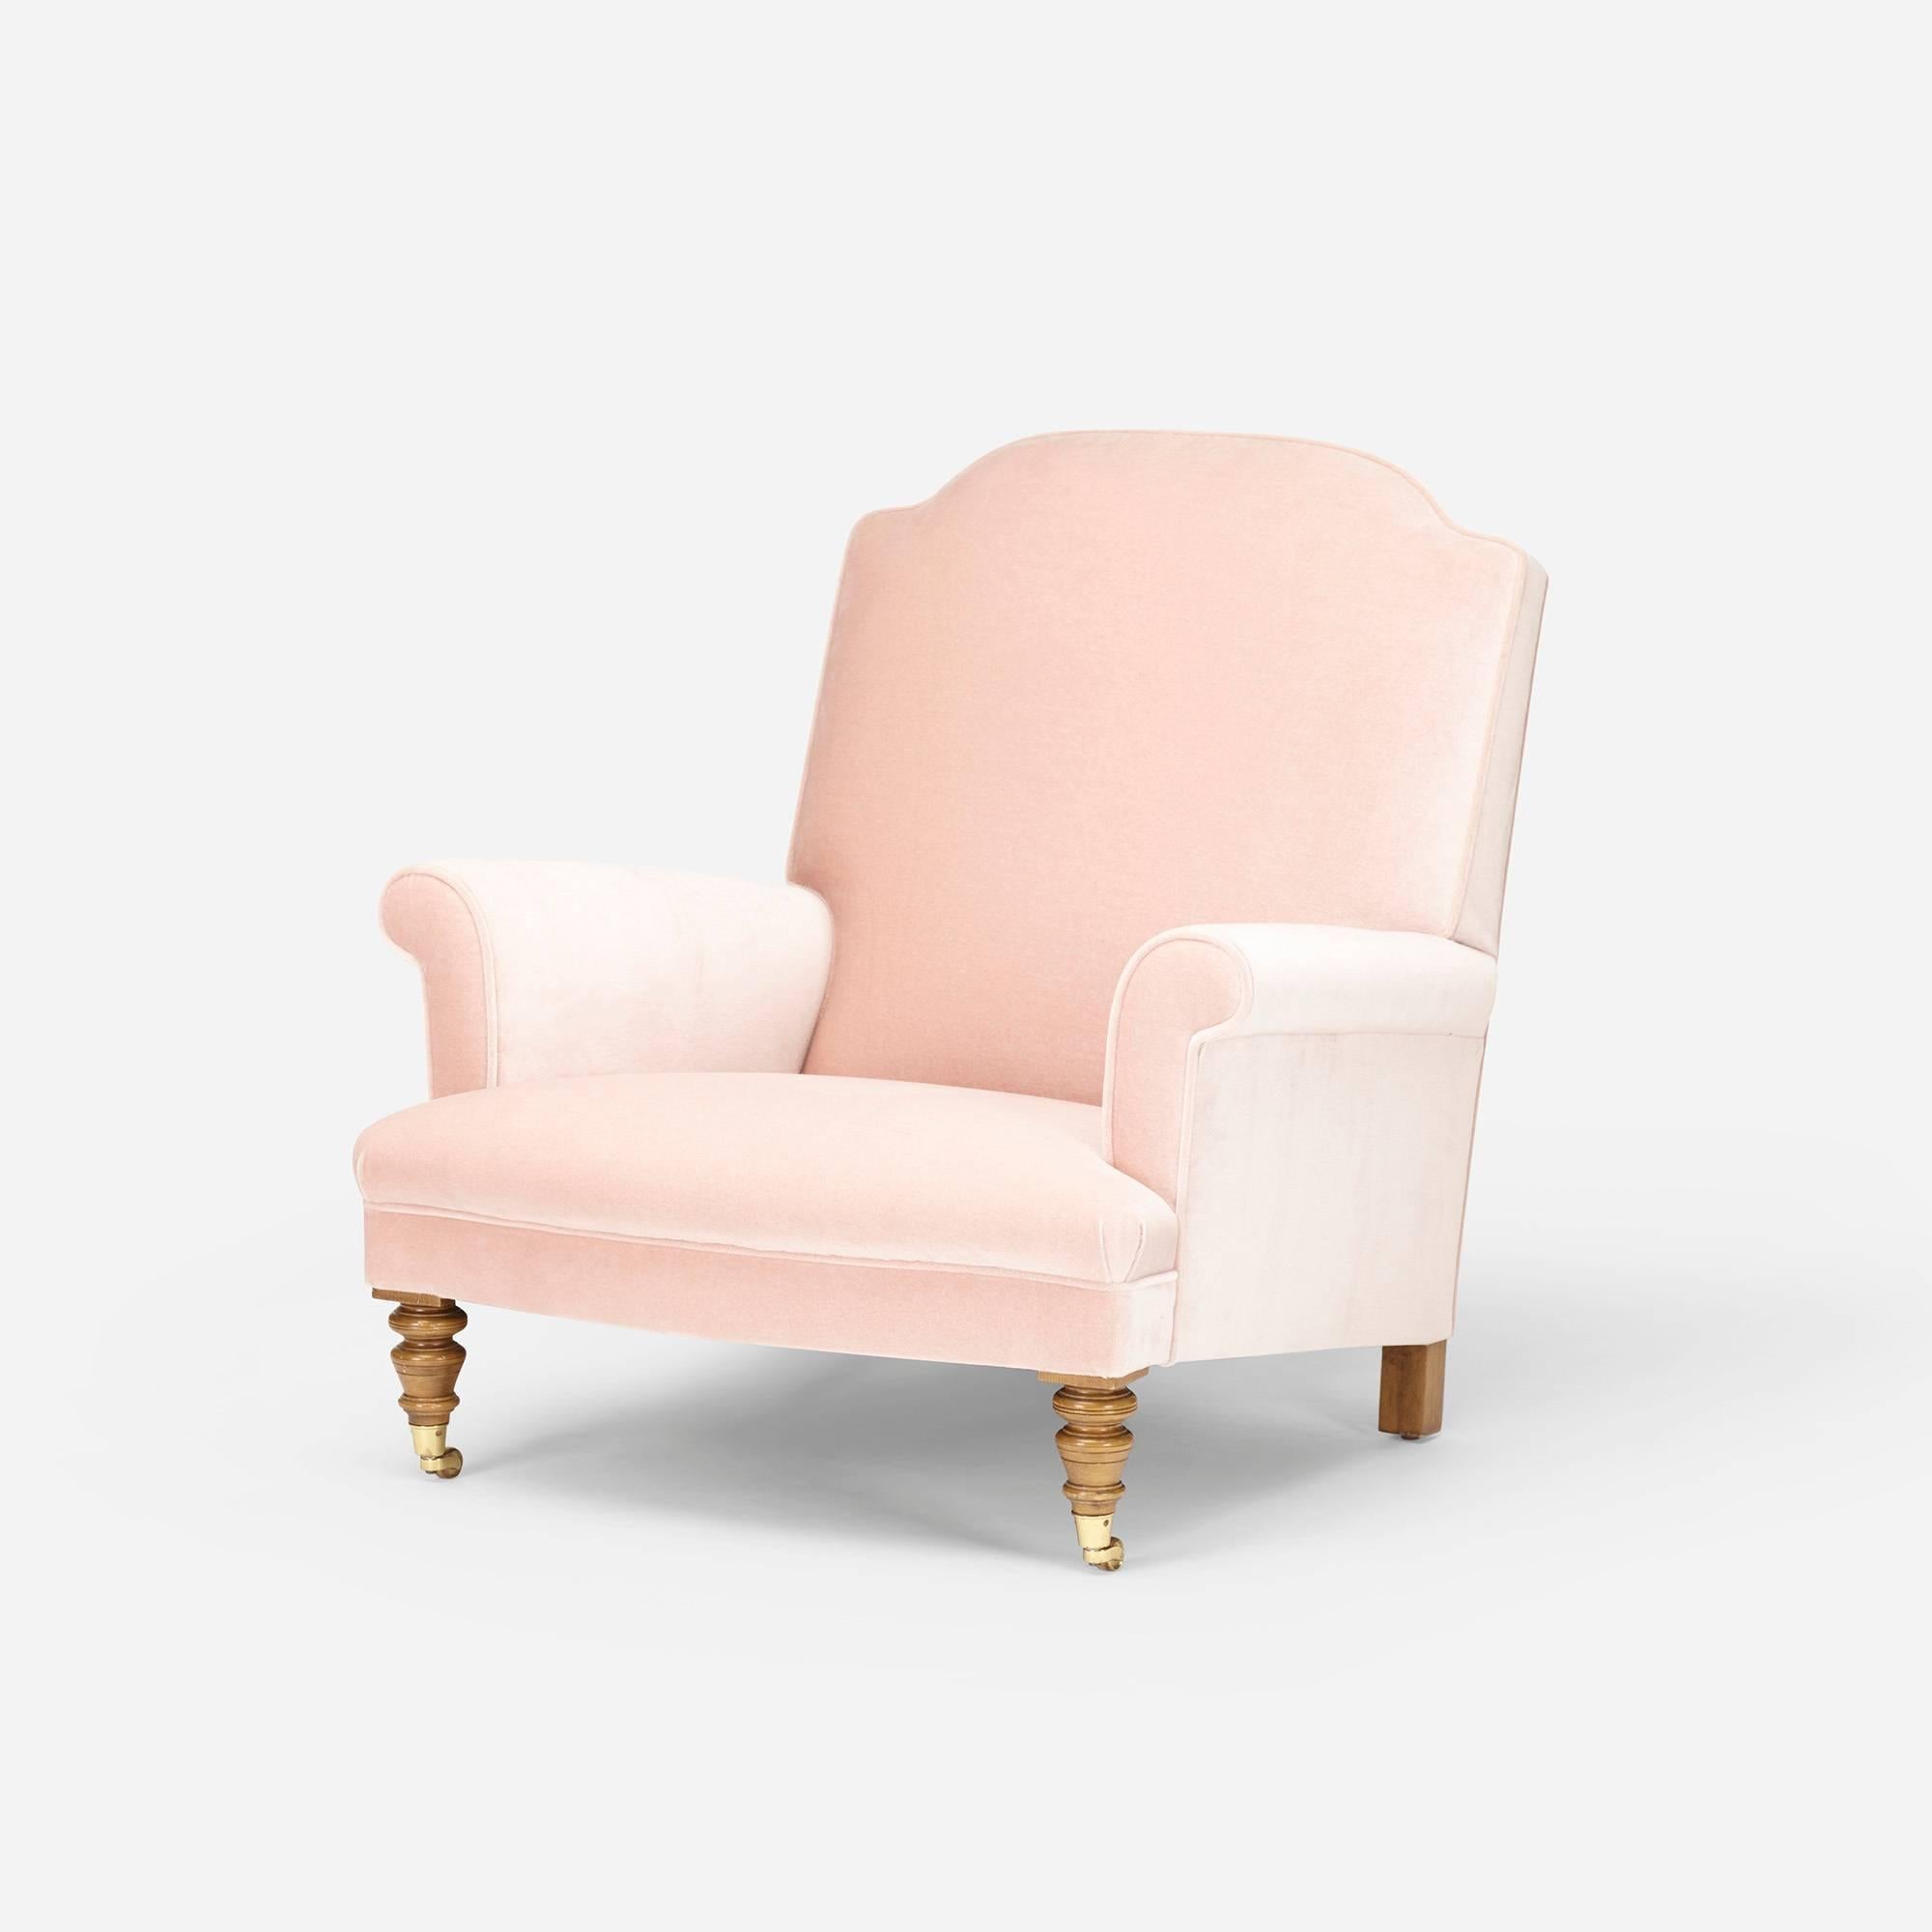 Chair has been recently updated in a soft, pale pink velvet.